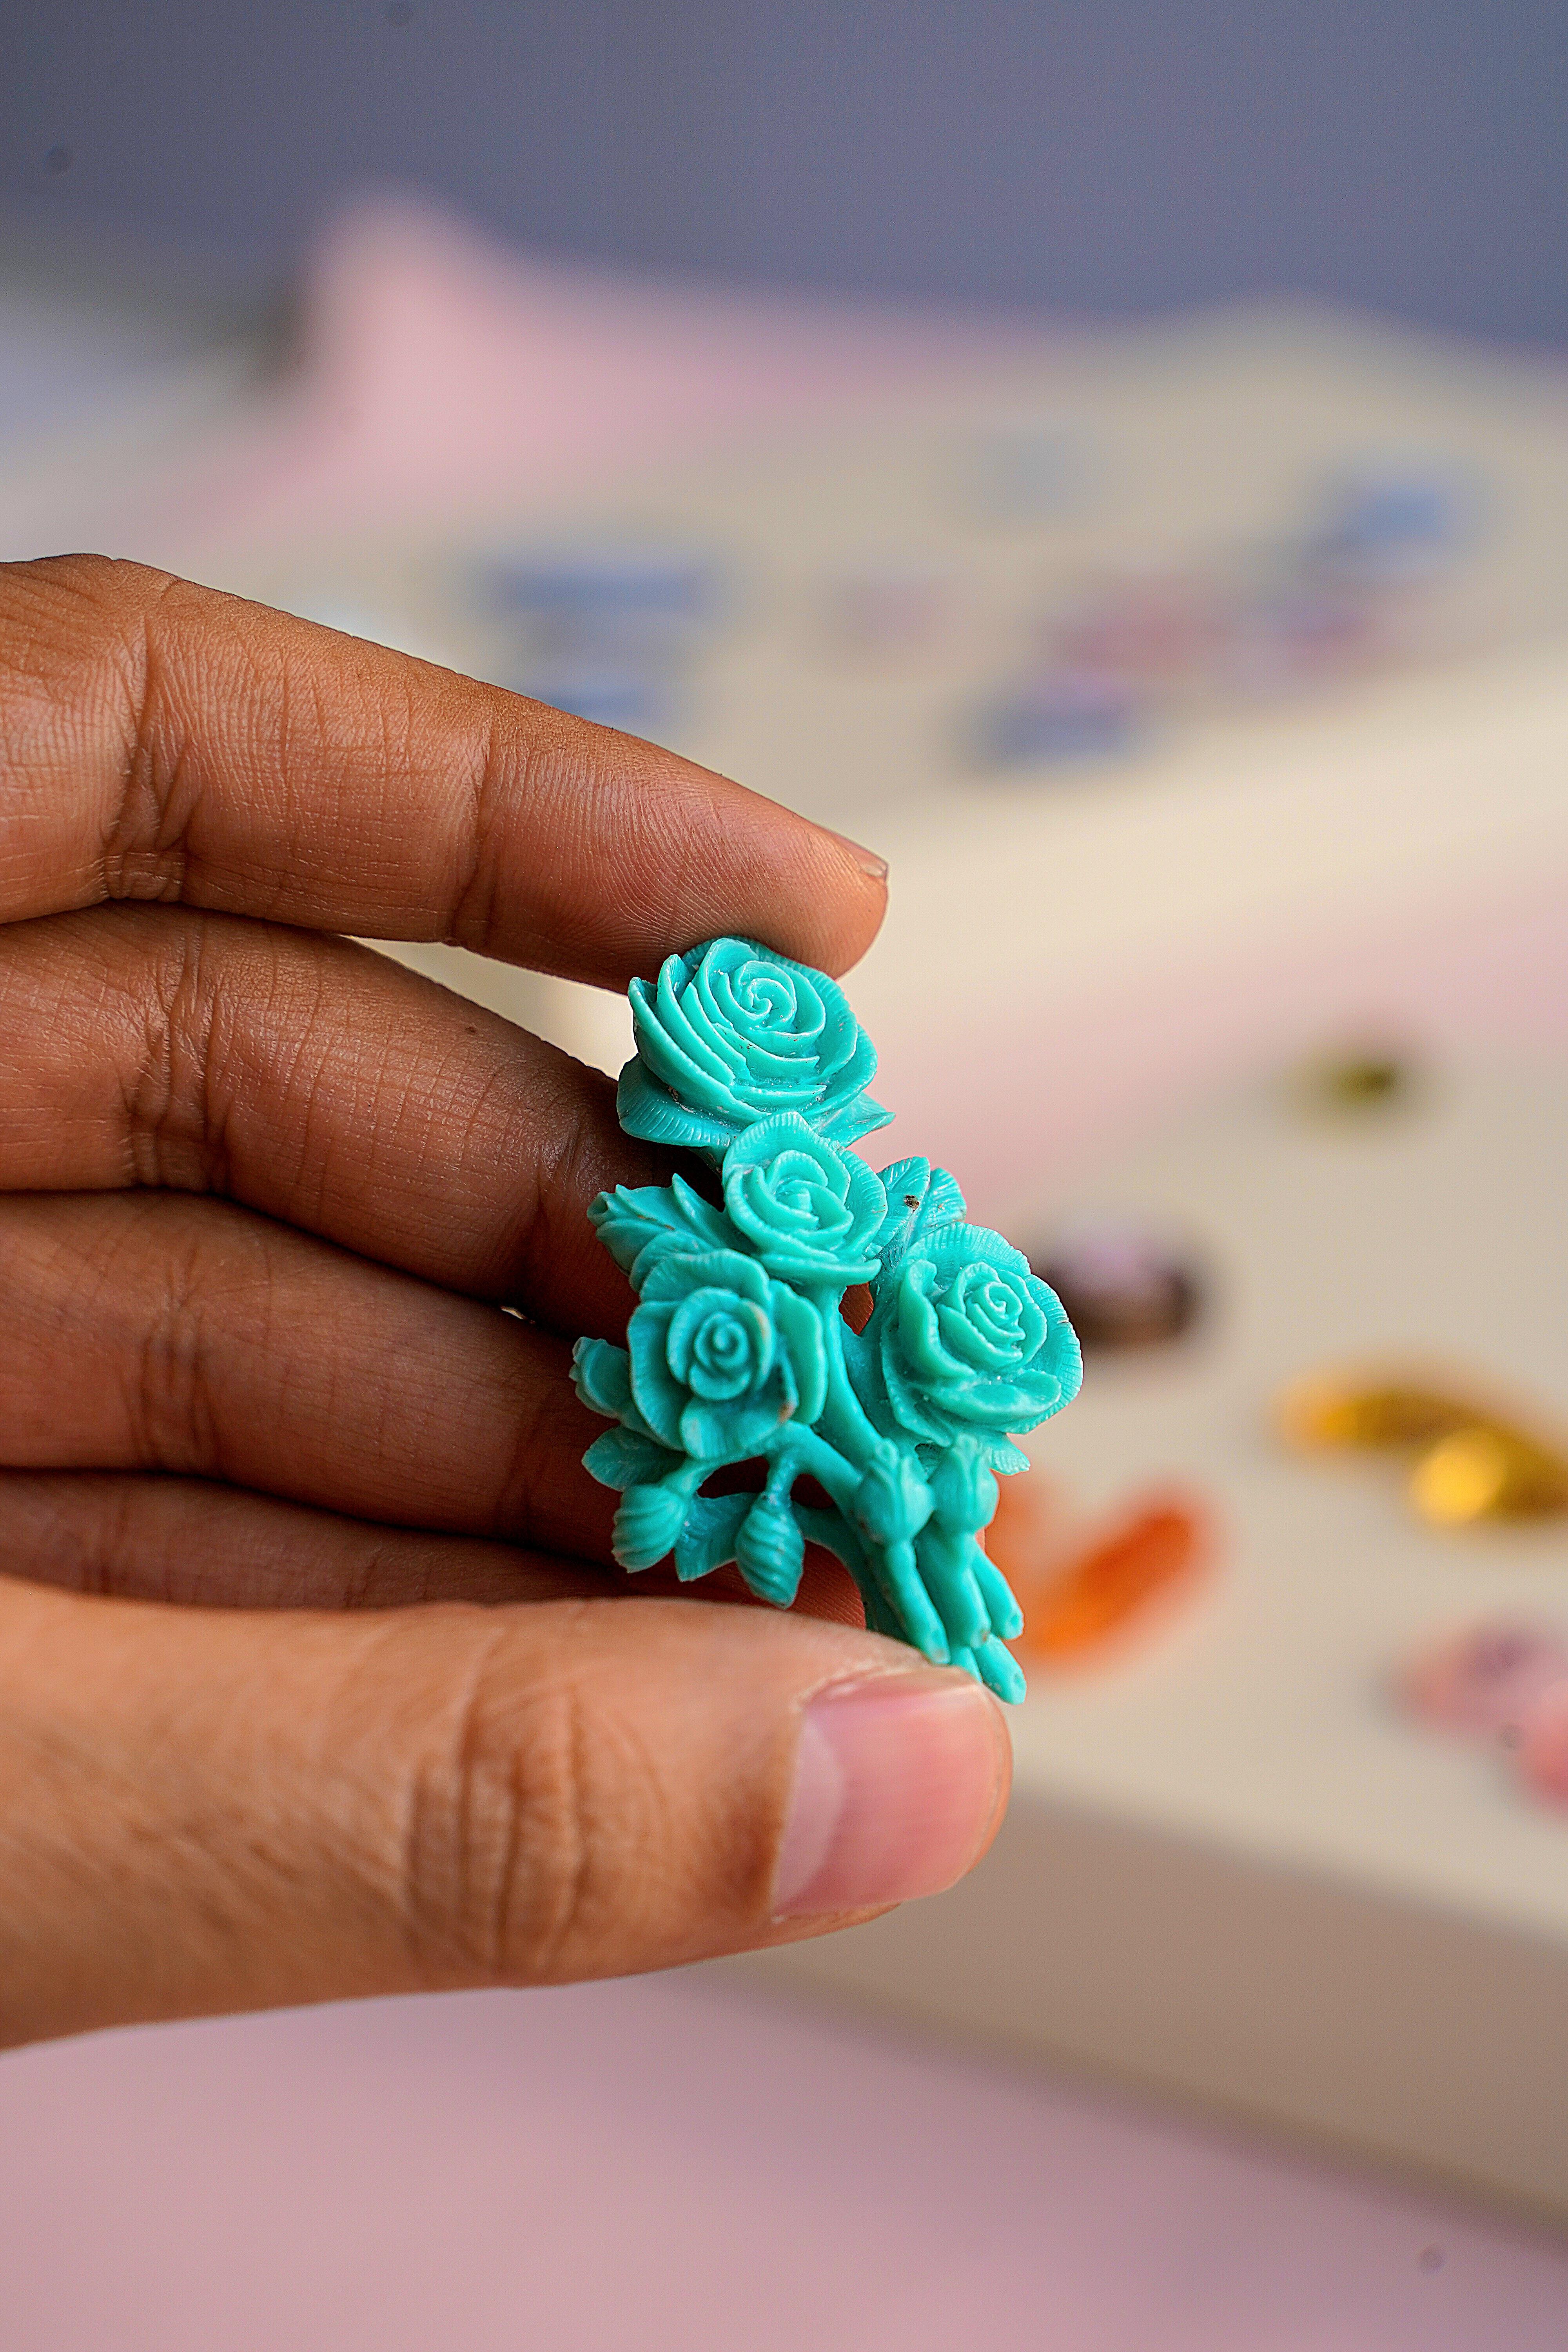 Our one-of-a-kind hand-carved bouquet of four roses on natural Arizona Turquoise is a remarkable piece of art created by our expert lapidary artist in Jaipur. With meticulous craftsmanship, the lapidary artist has transformed a raw stone into a